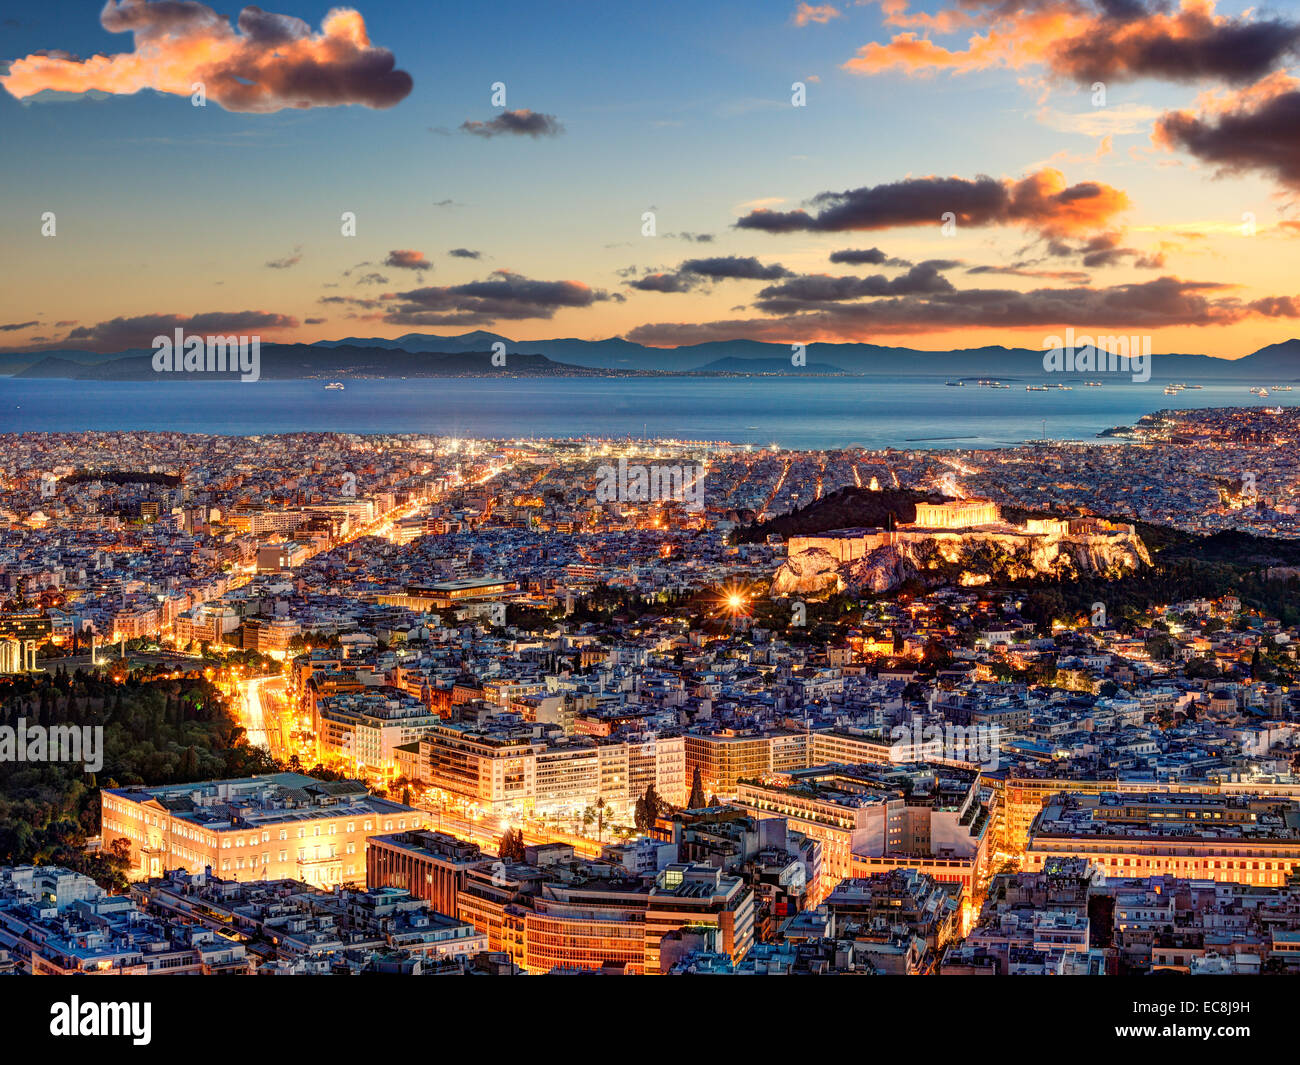 Athens after sunset with a view of the Parthenon on the Acropolis, the Parliament and the Saronic islands in Greece Stock Photo